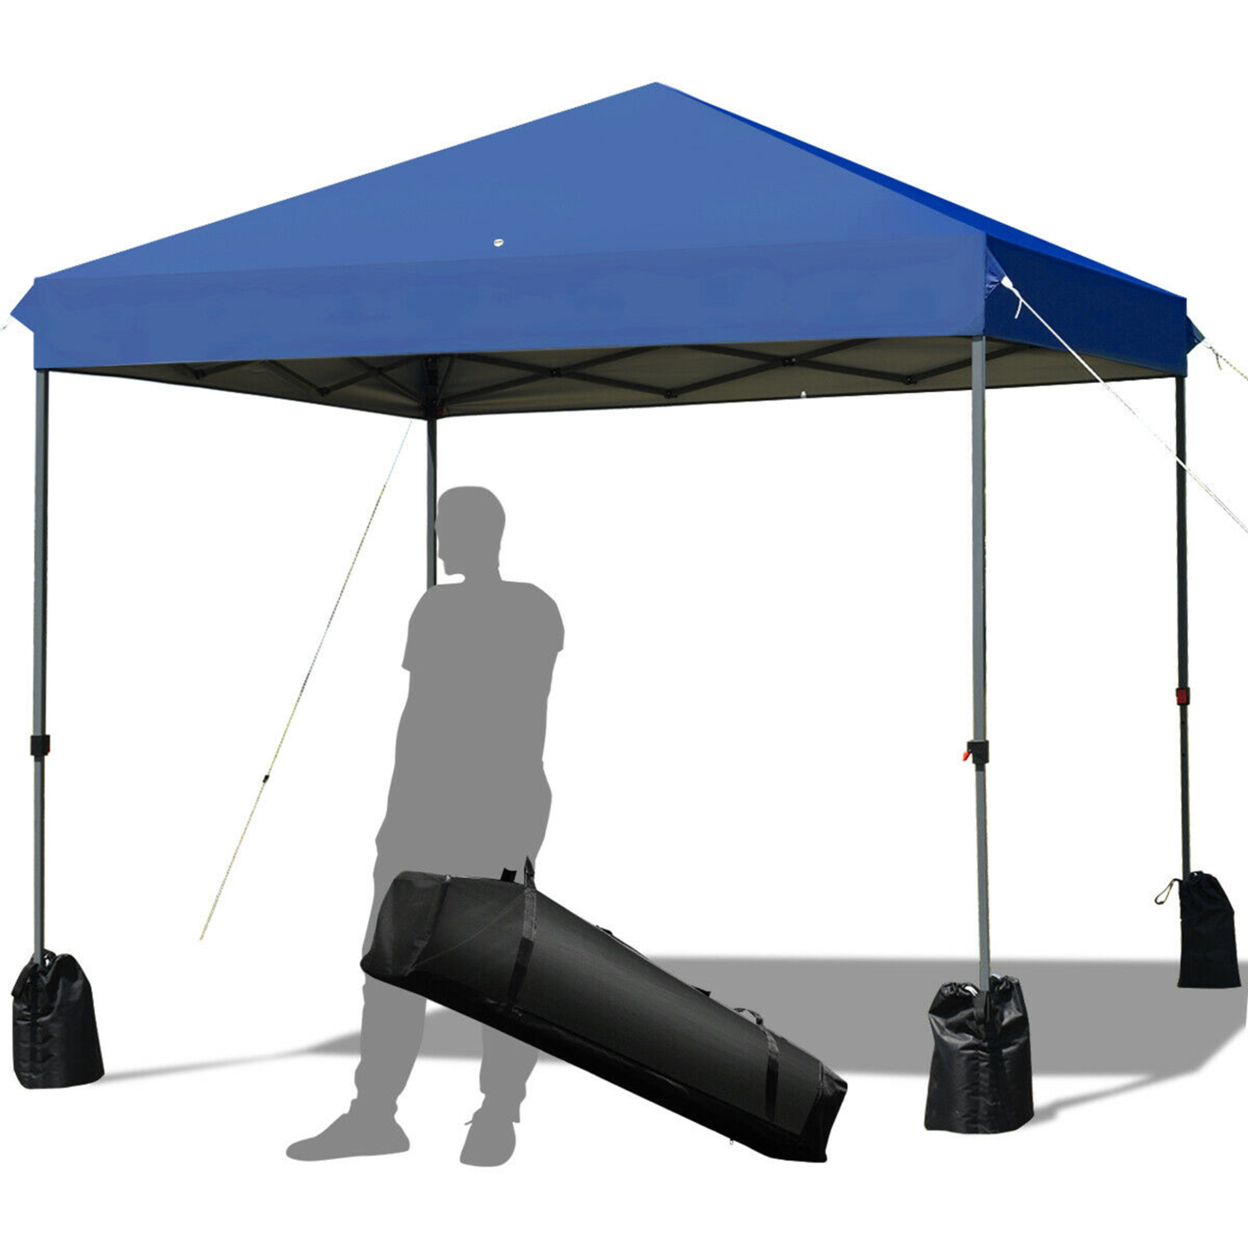 8x8 FT Pop Up Canopy Tent Shelter Wheeled Carry Bag 4 Canopy Sand Bag - Blue